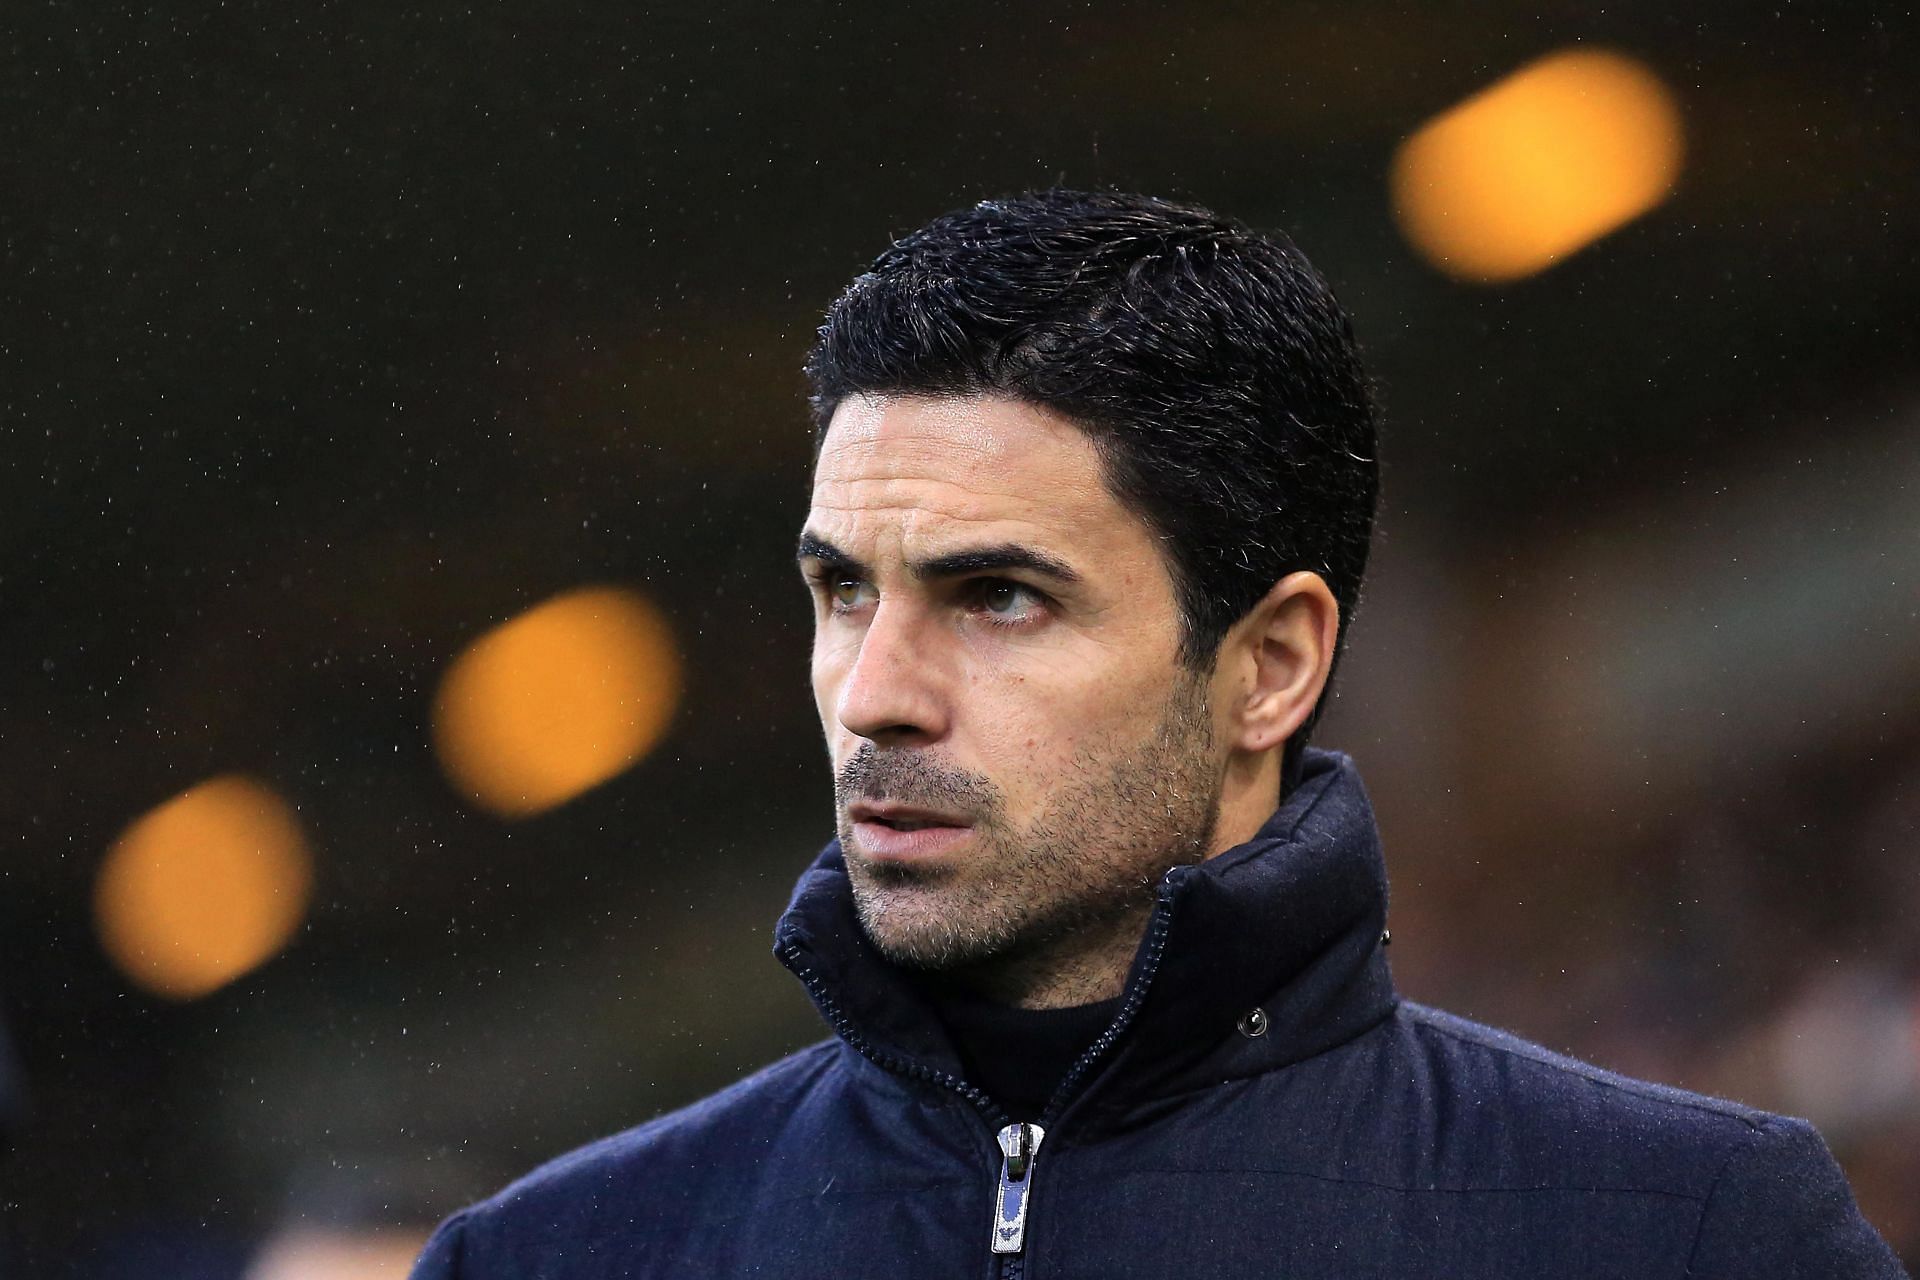 Arsenal manager Mikel Arteta is preparing to host Liverpool at the Emirates.